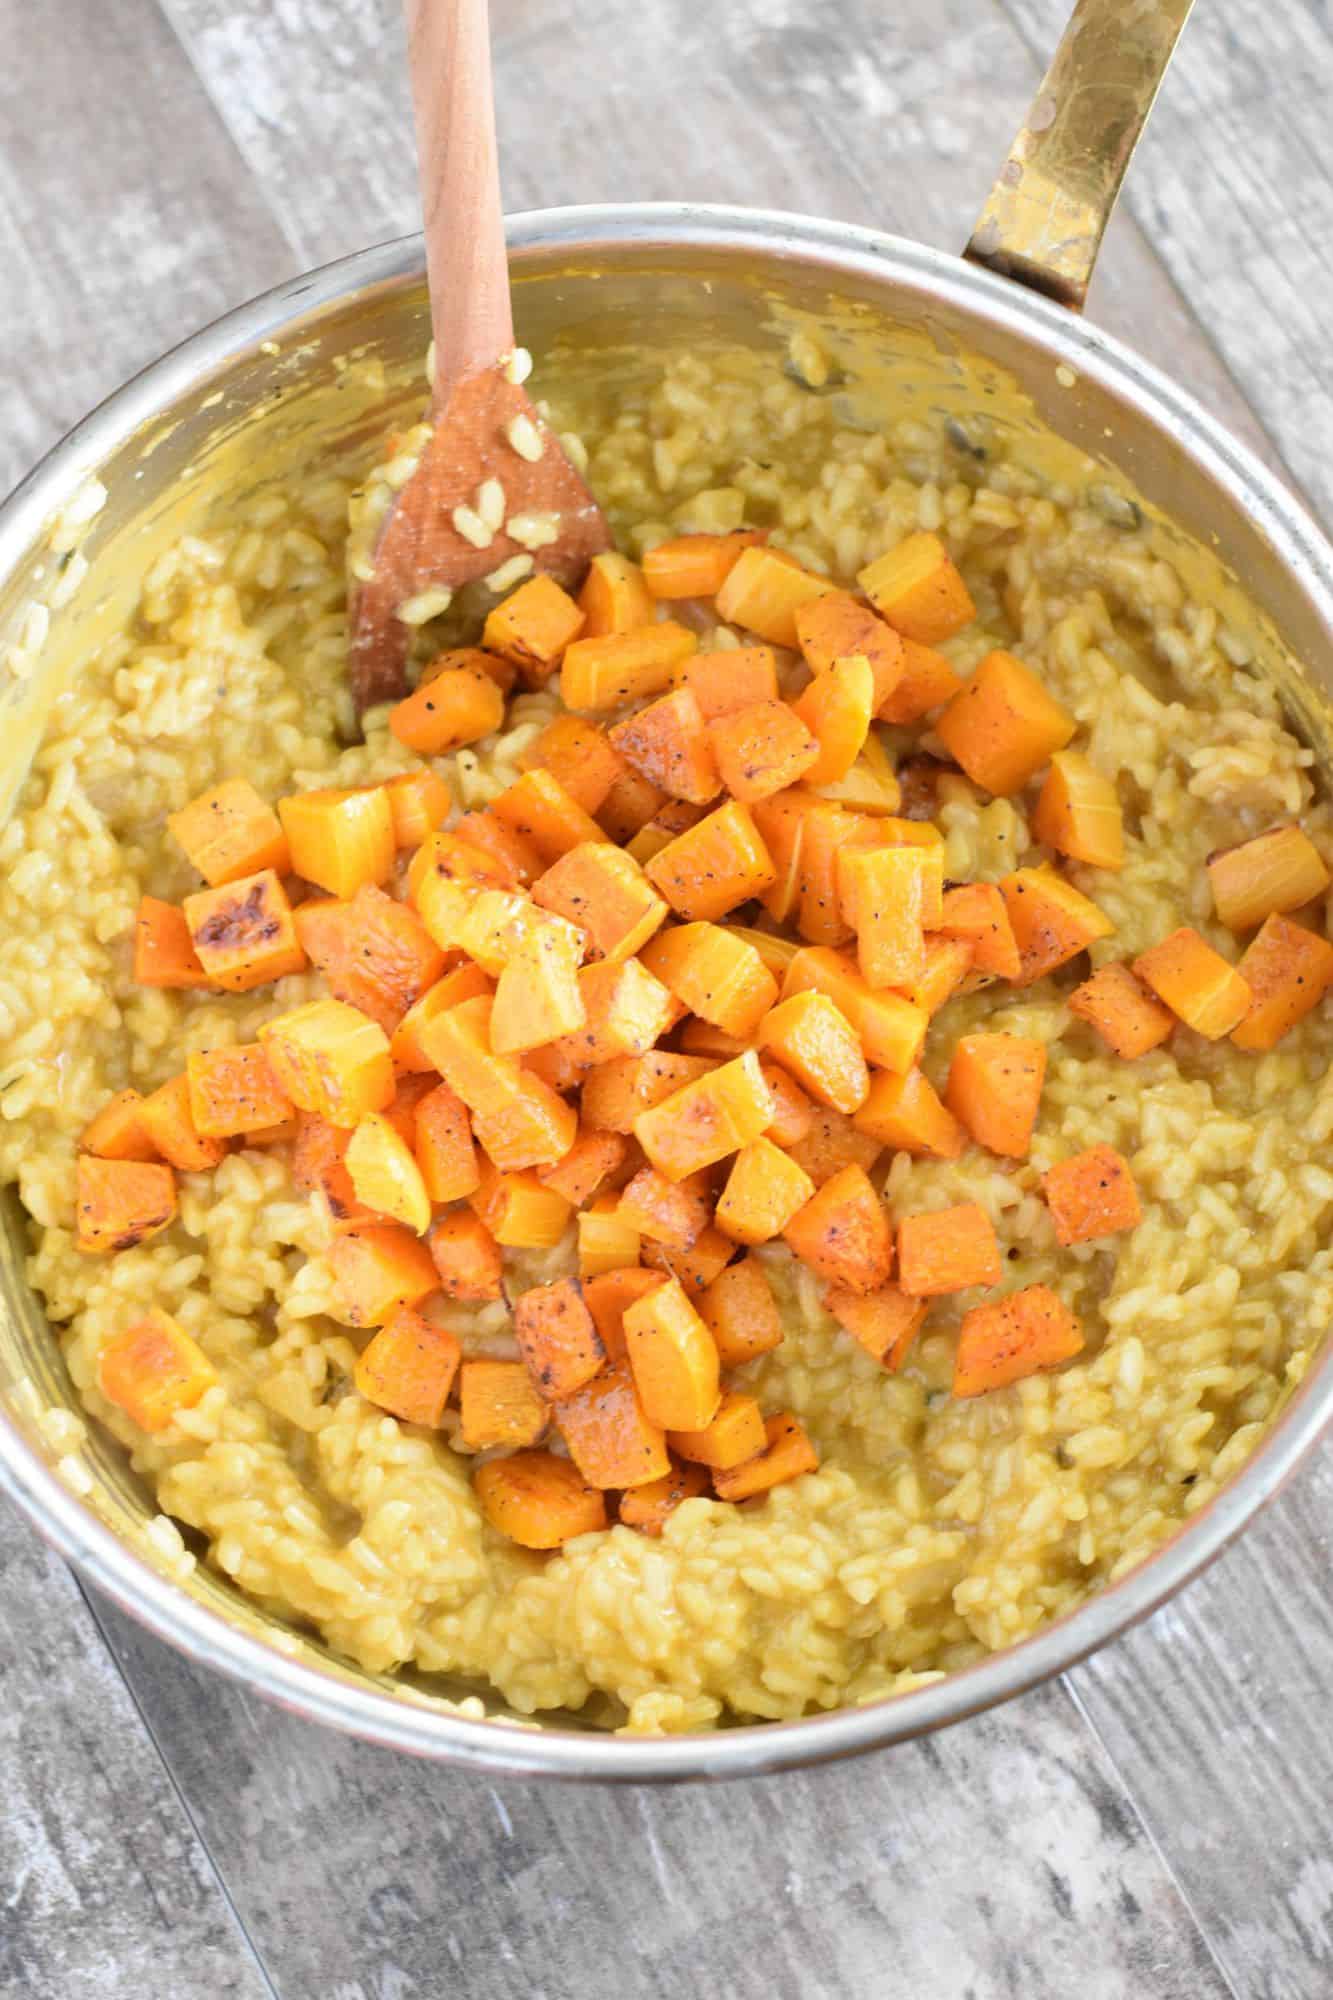 butternut squash added to the risotto in the pan